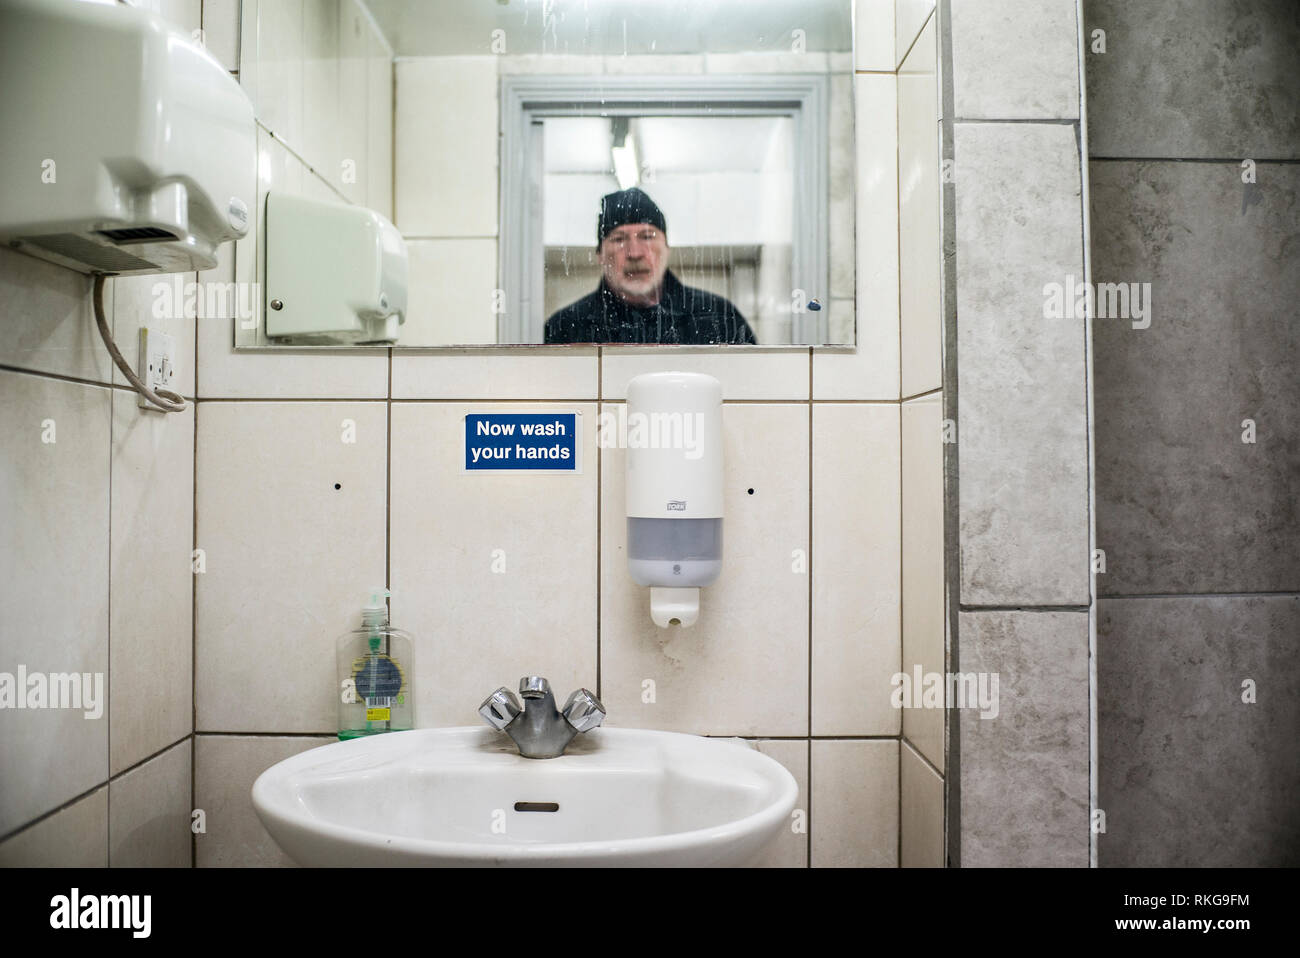 bearded man in mirror, now wash your hands sign, public toilet,hand dryer, liquid soap dispenser, Stock Photo